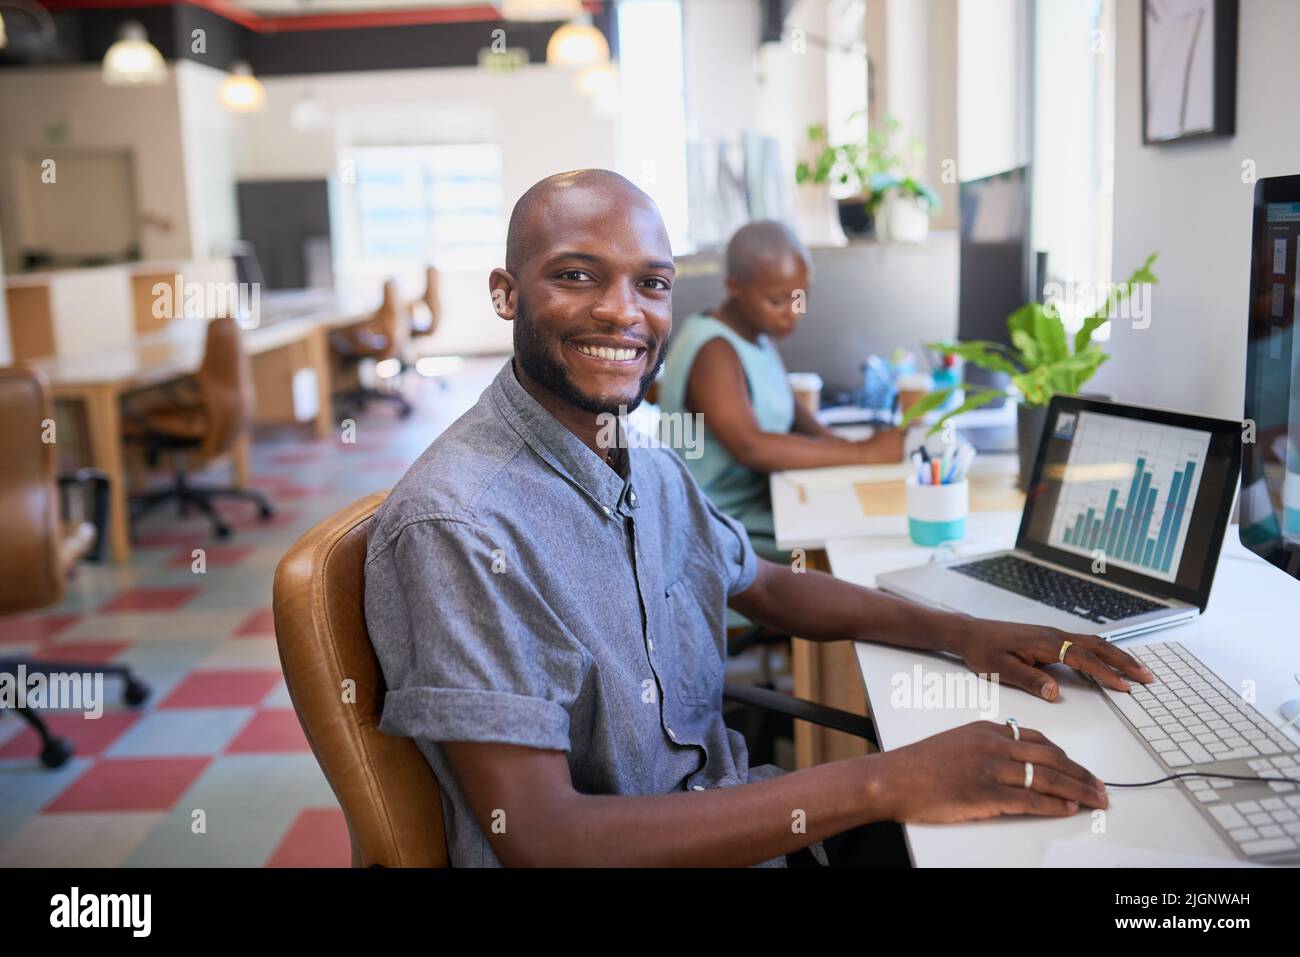 A Black man smiles at his desk in open plan creative office Stock Photo